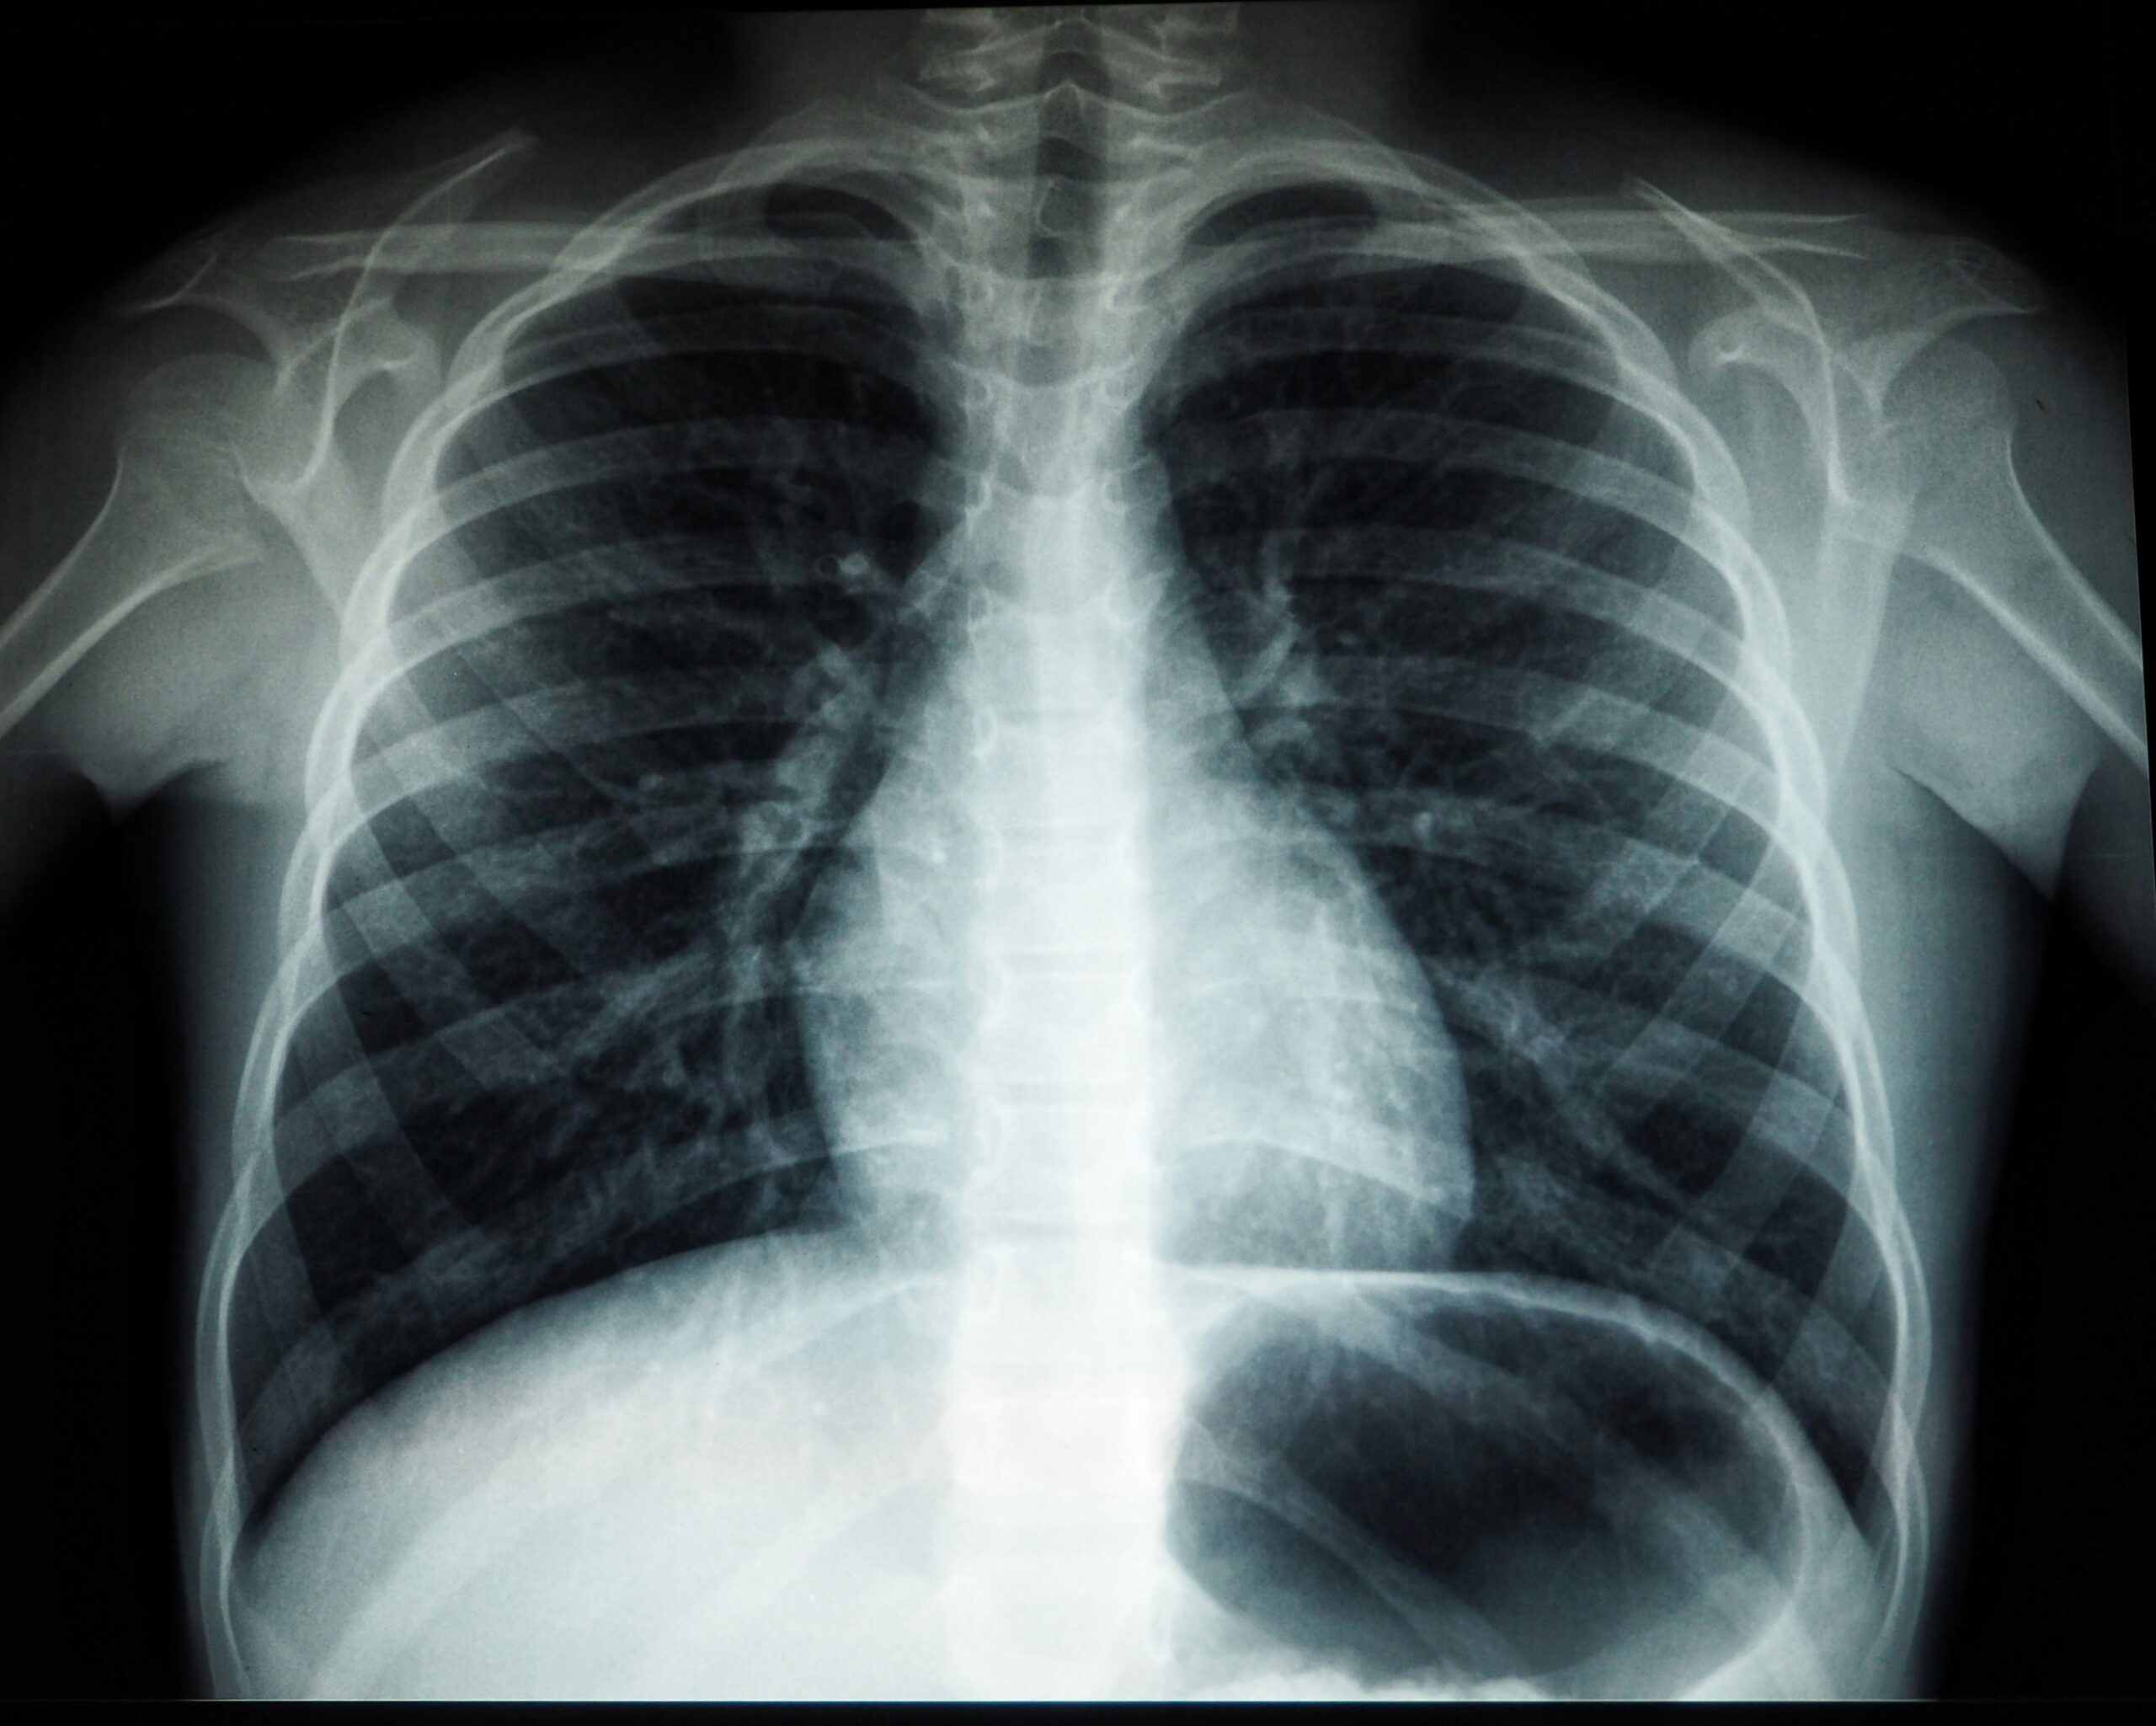 Mesothelioma: What Is, Types, Causes, Diagnosis, and Treatment